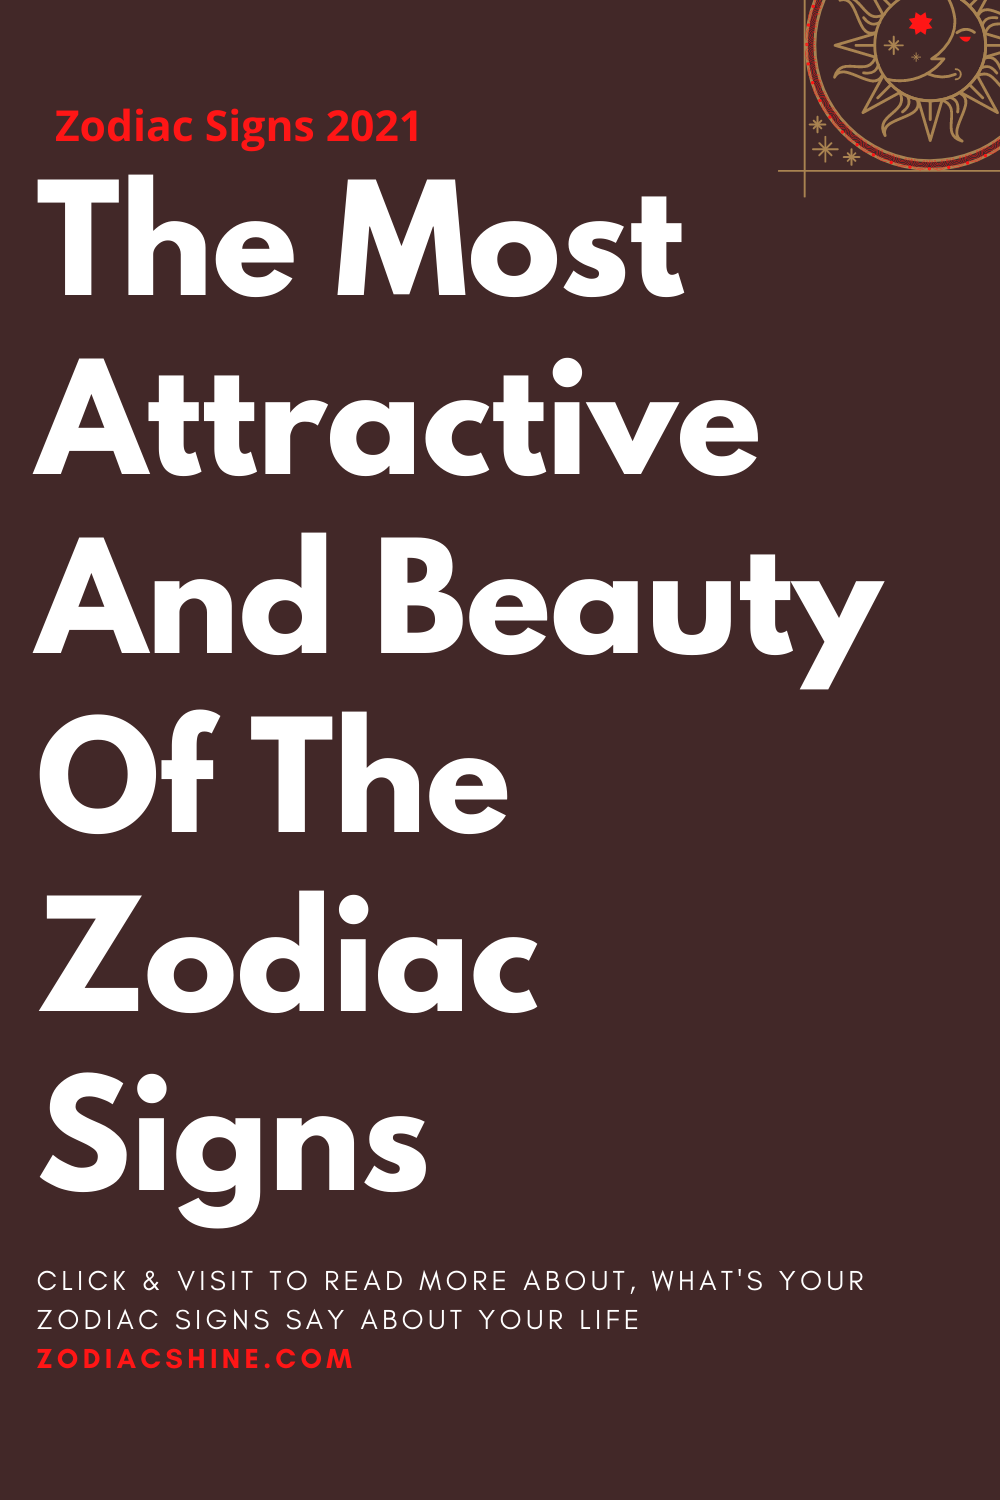 The Most Attractive And Beauty Of The Zodiac Signs